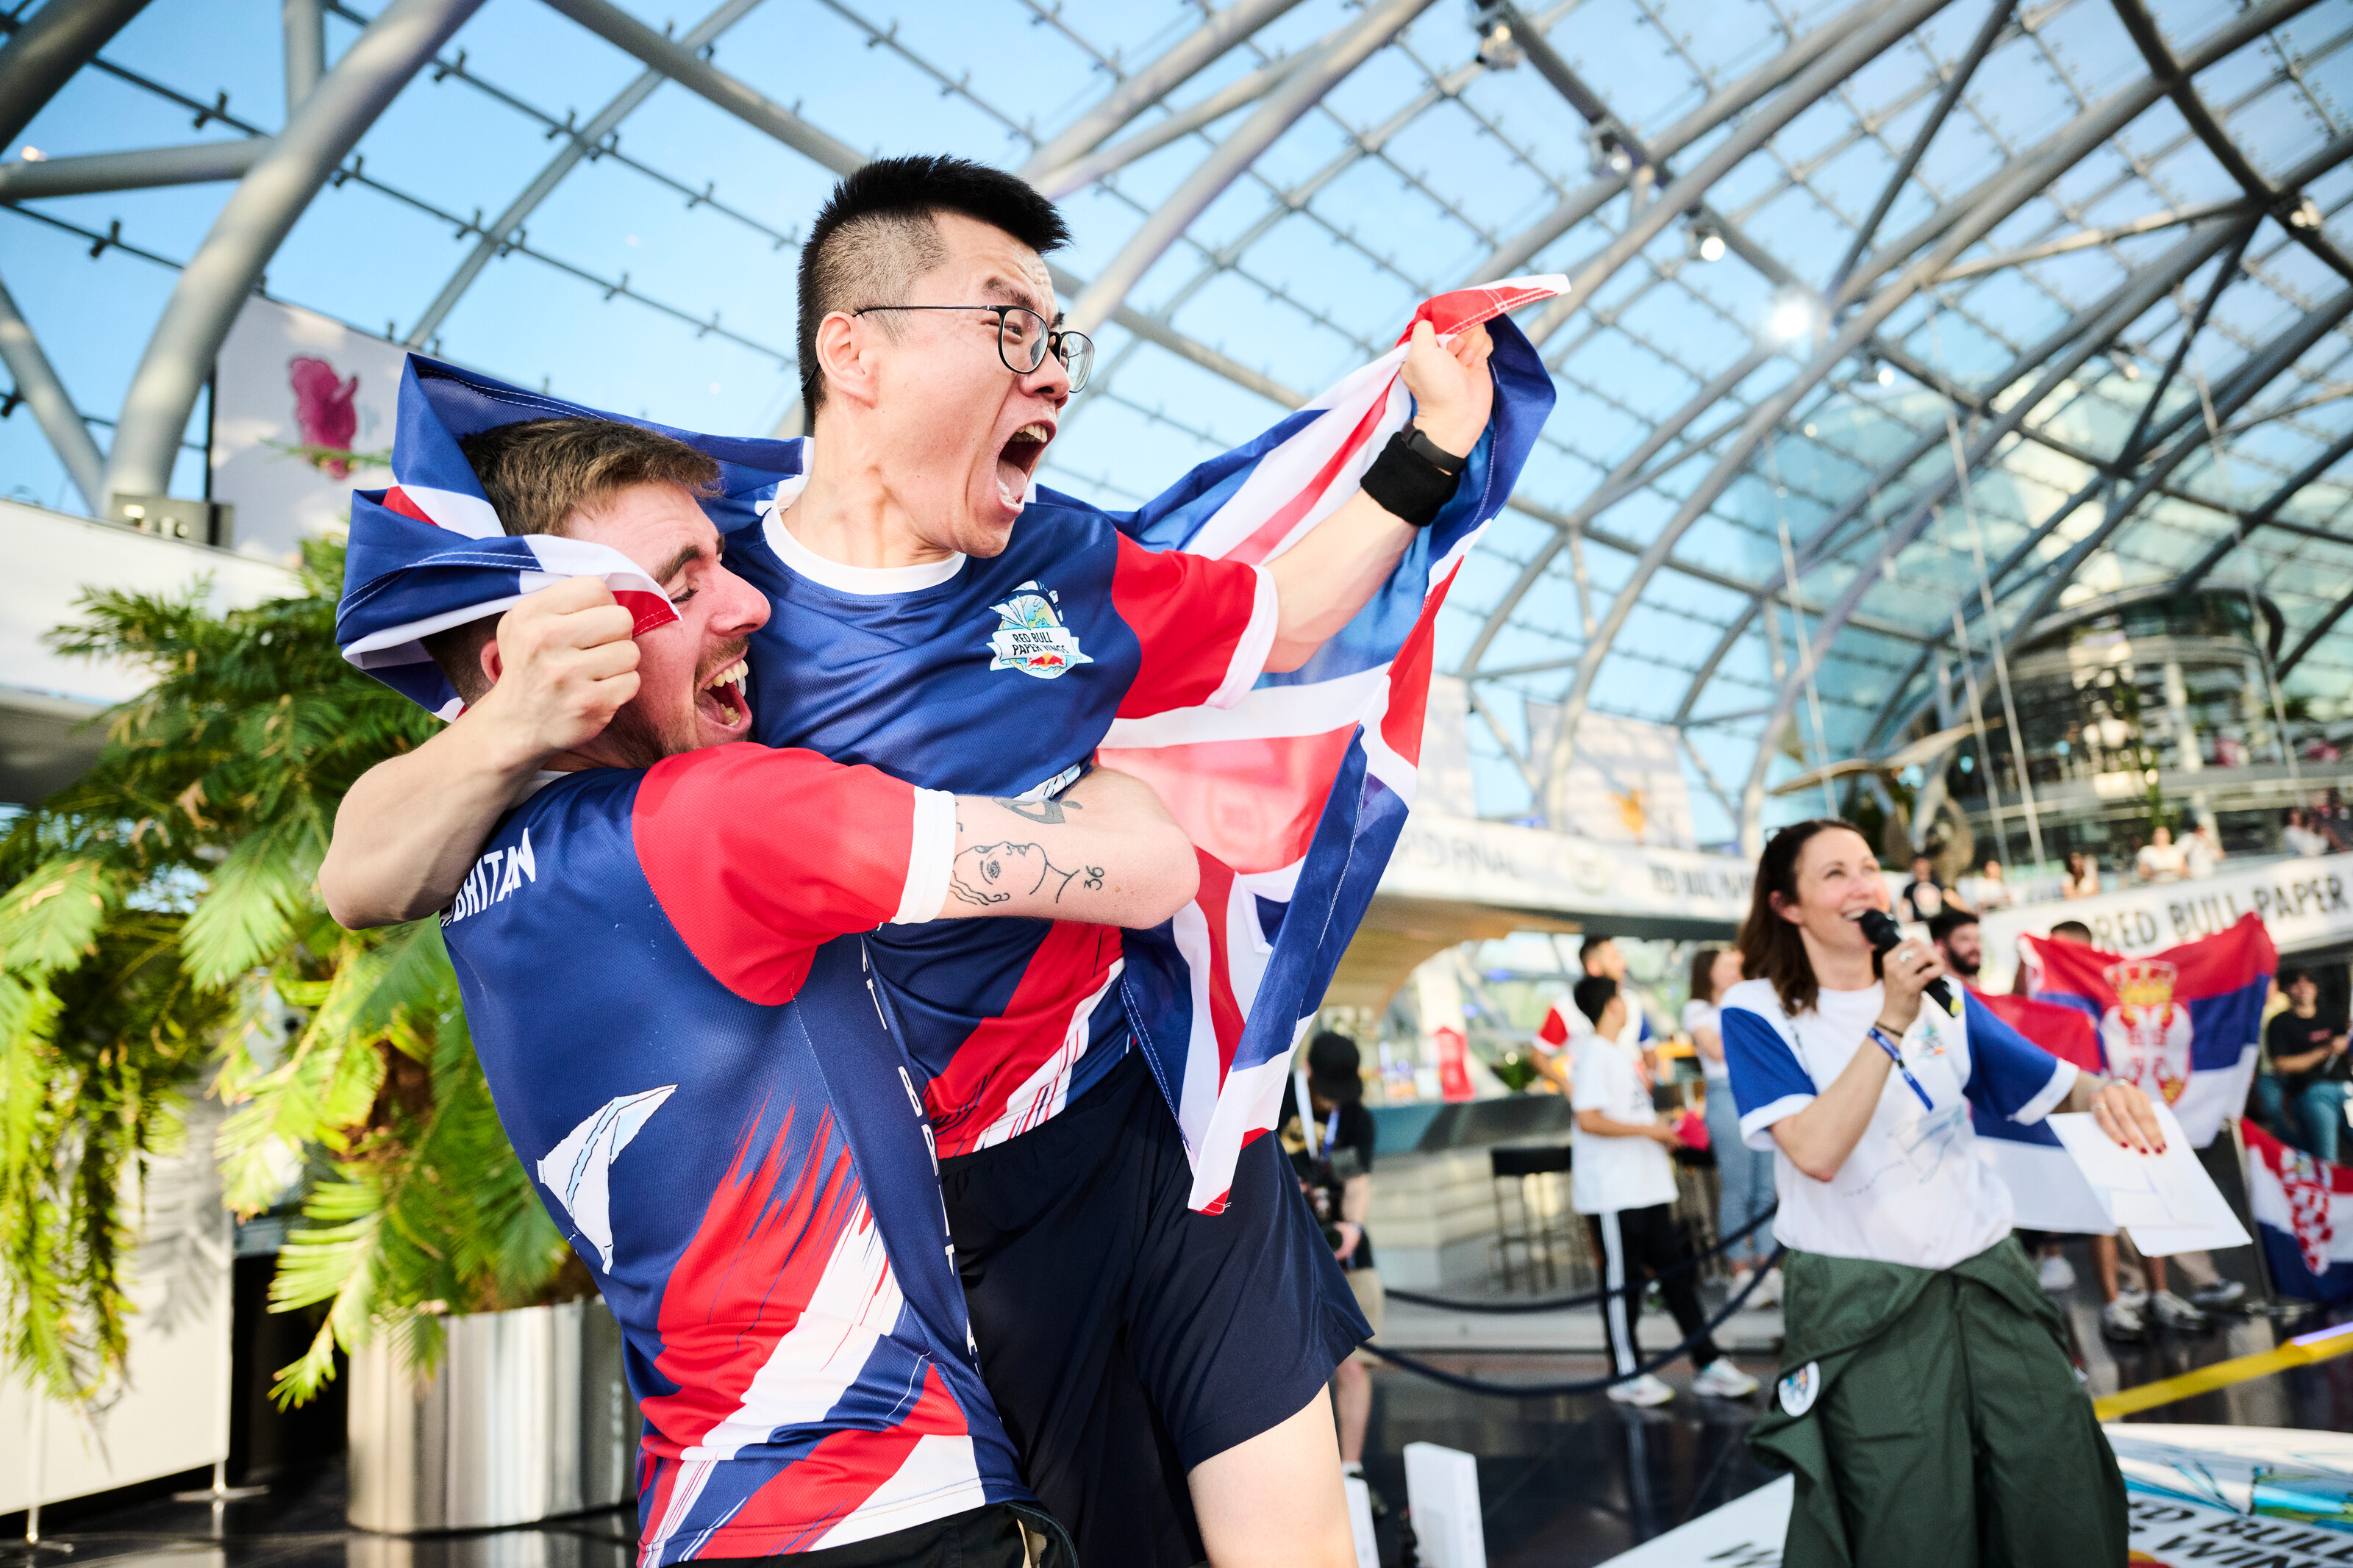 Yicheng Sun of Great Britain celebrate with his team at the Longest Distance discipline during the Red Bull Paper Wings World Finals 2022 in Salzburg, Austria. (Red Bull Paper Wings)